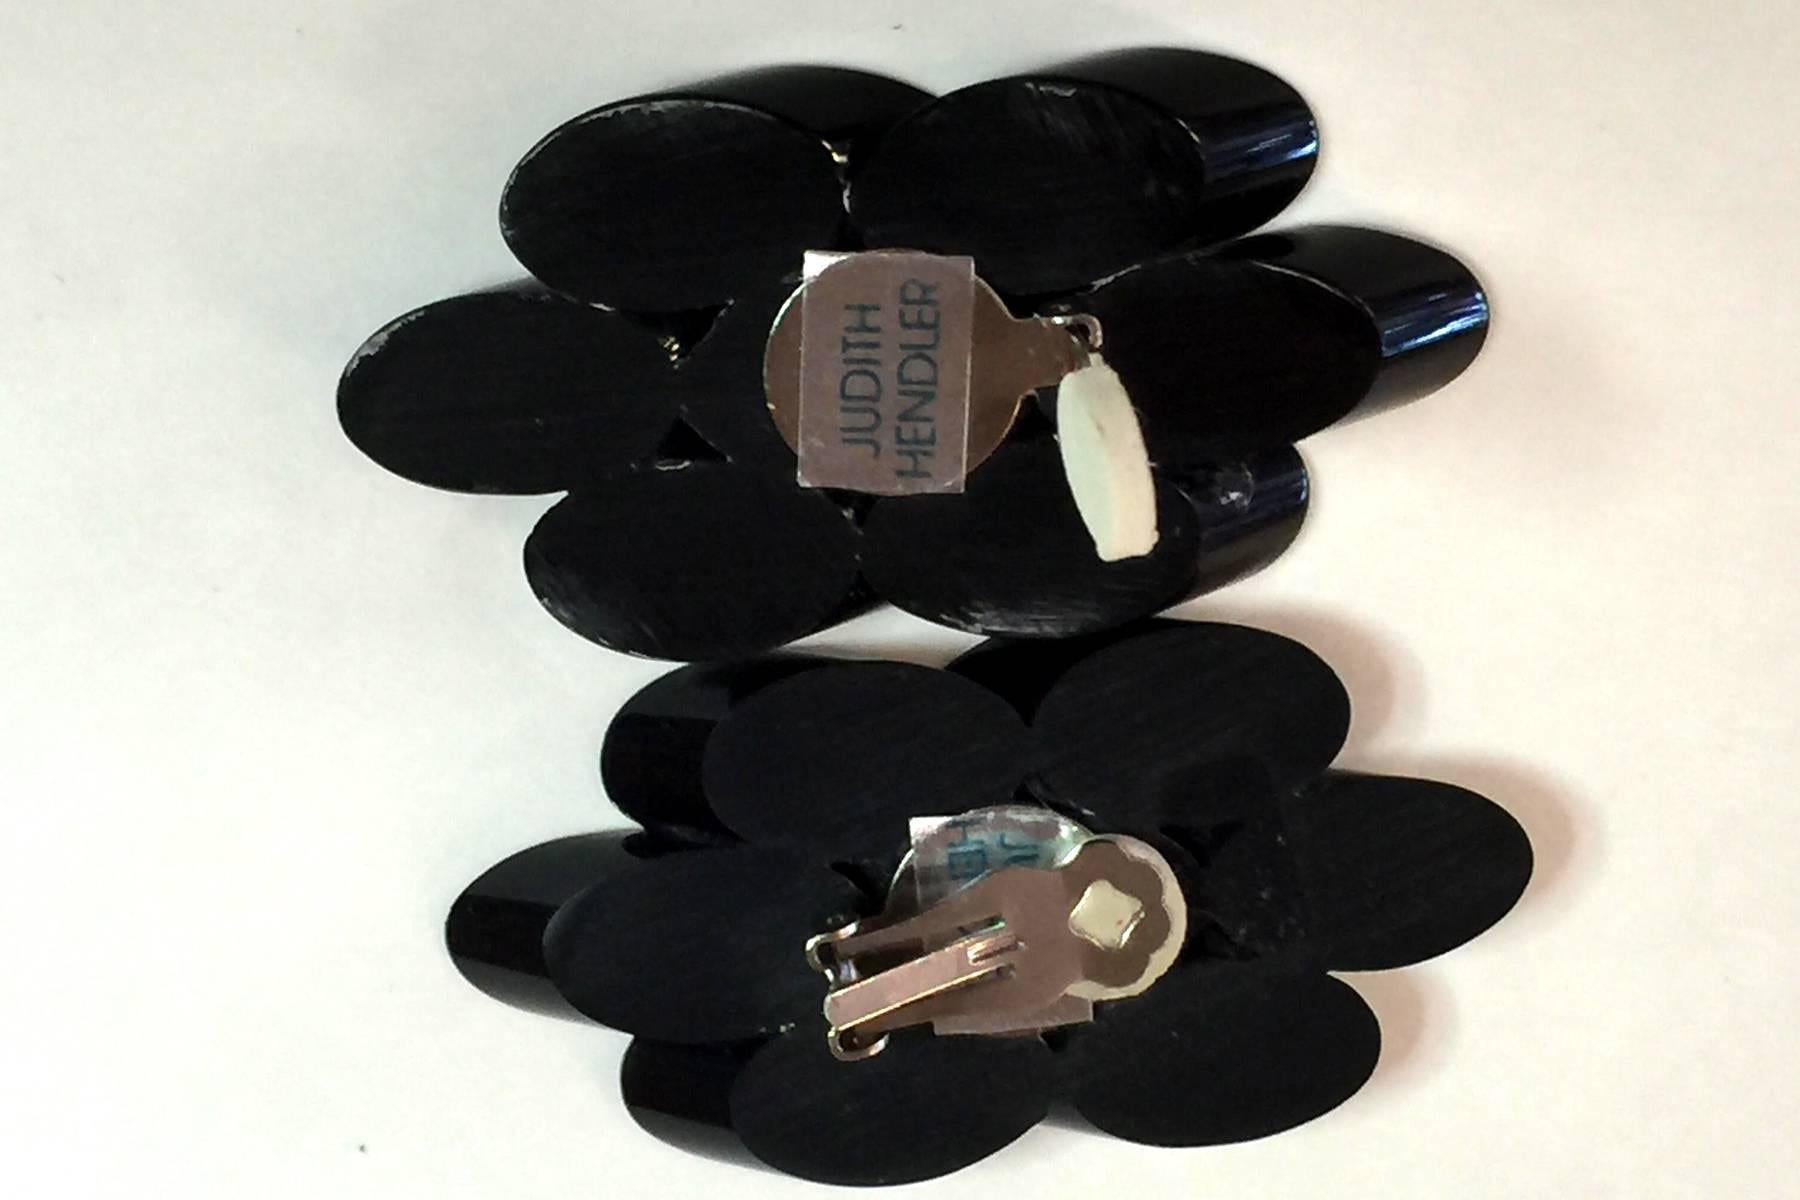 These ACRI-GEMS black opaque acrylic clip on earrings by Judith Hendler are of the late 1970's early 1980's era. Appearing a bit like flattened flower blossoms, they exude a quality which seems to bend space and time. Oblong and oval, these earrings